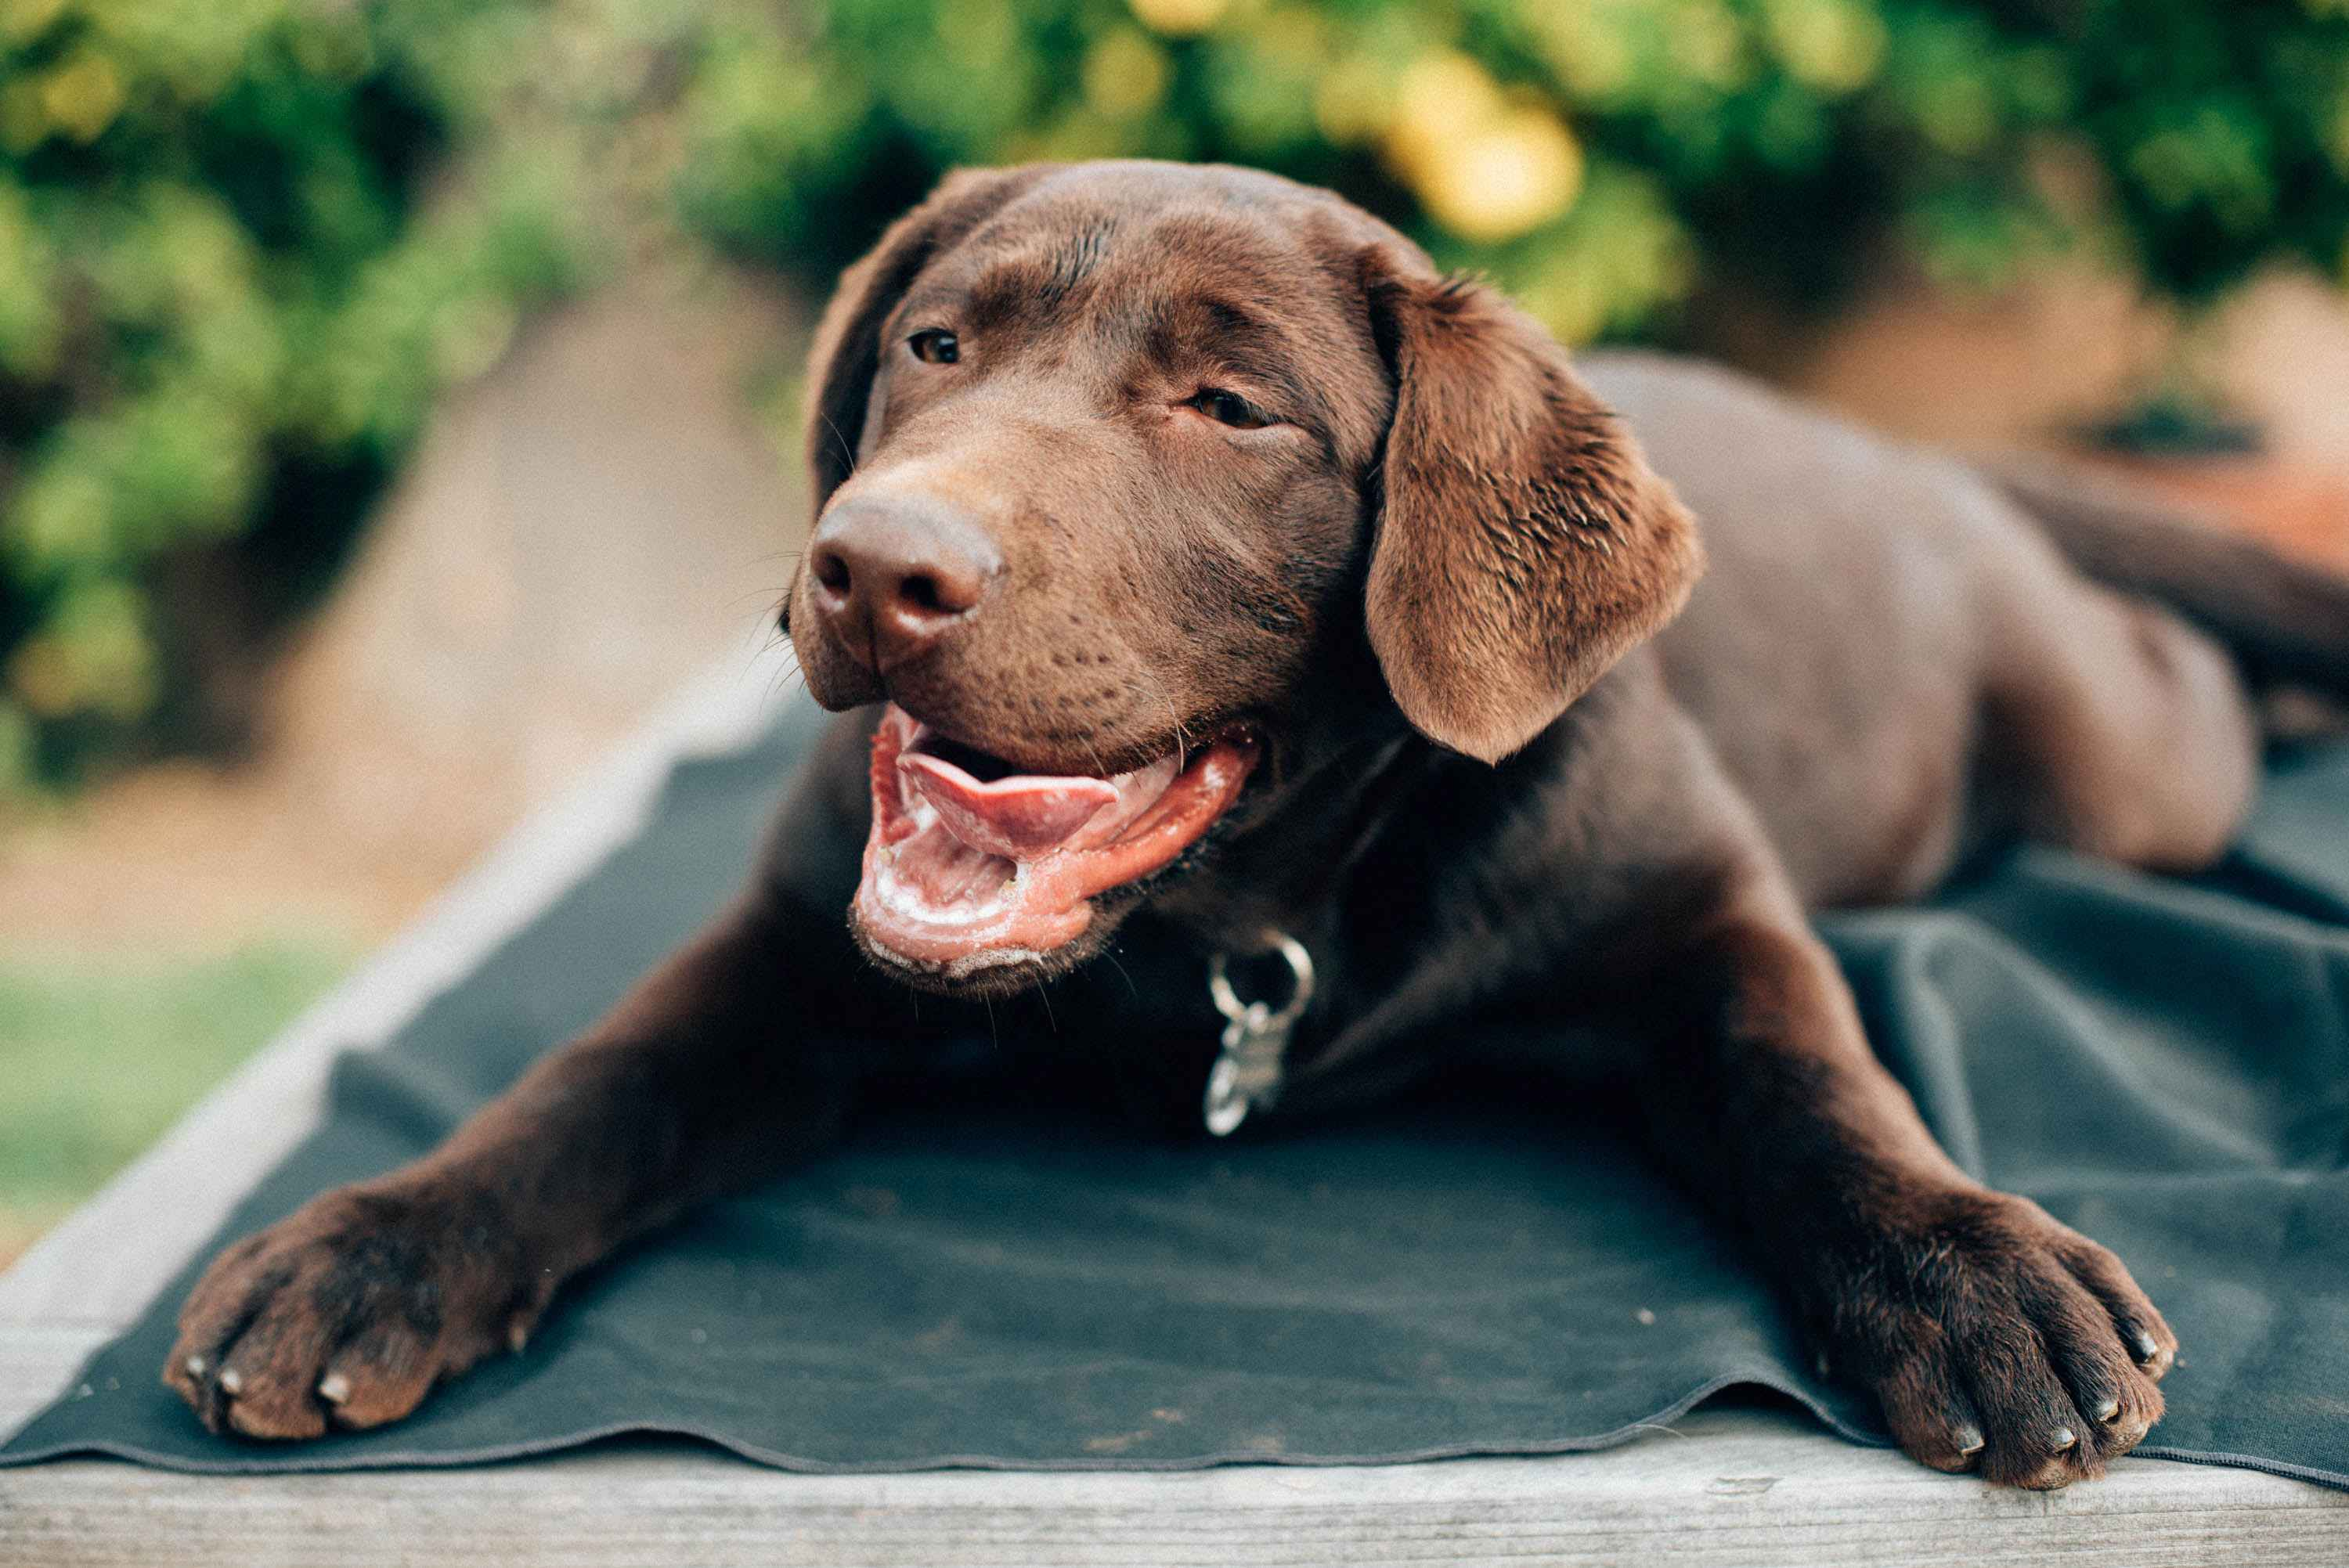 Labrador Retriever Grooming 101: Tips for Keeping Their Coat Clean and Fresh Between Baths